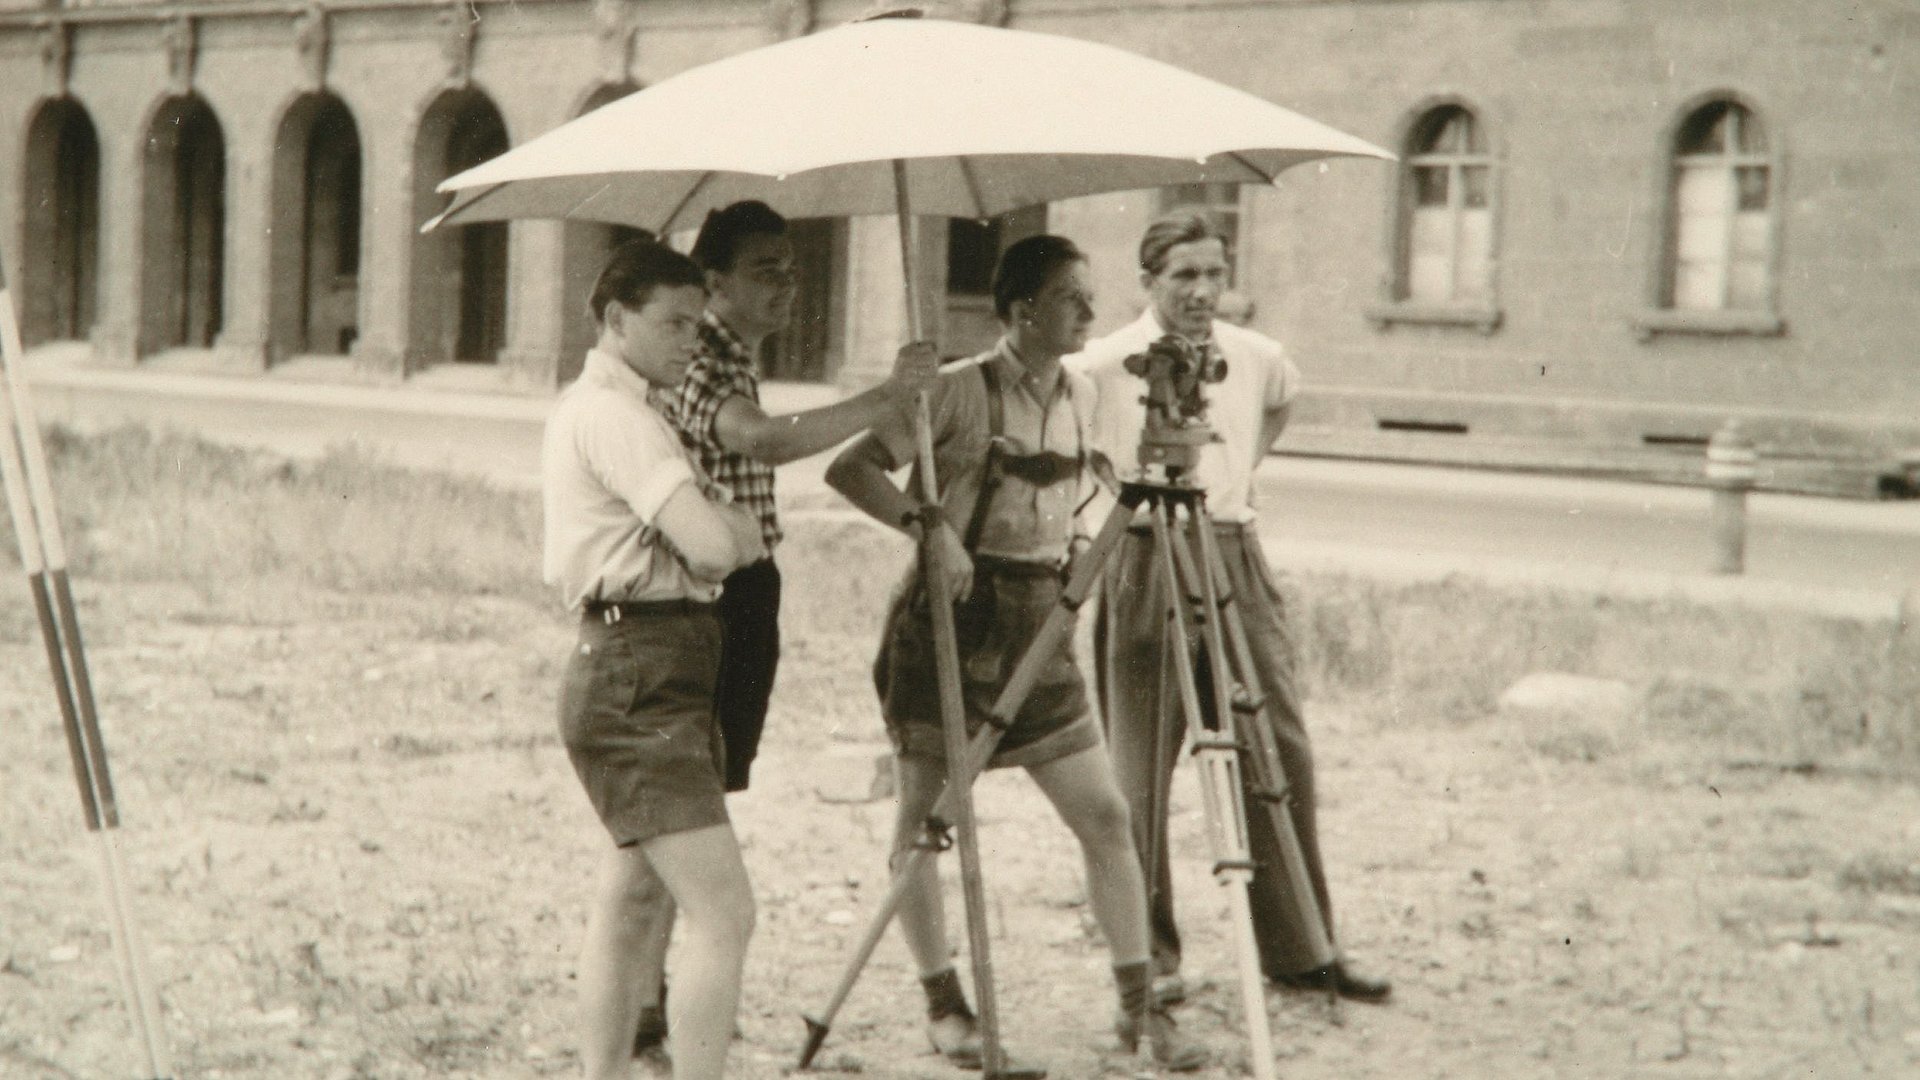 Geodesy exercise on the ruins in front of the Alte Pinakothek in 1950.